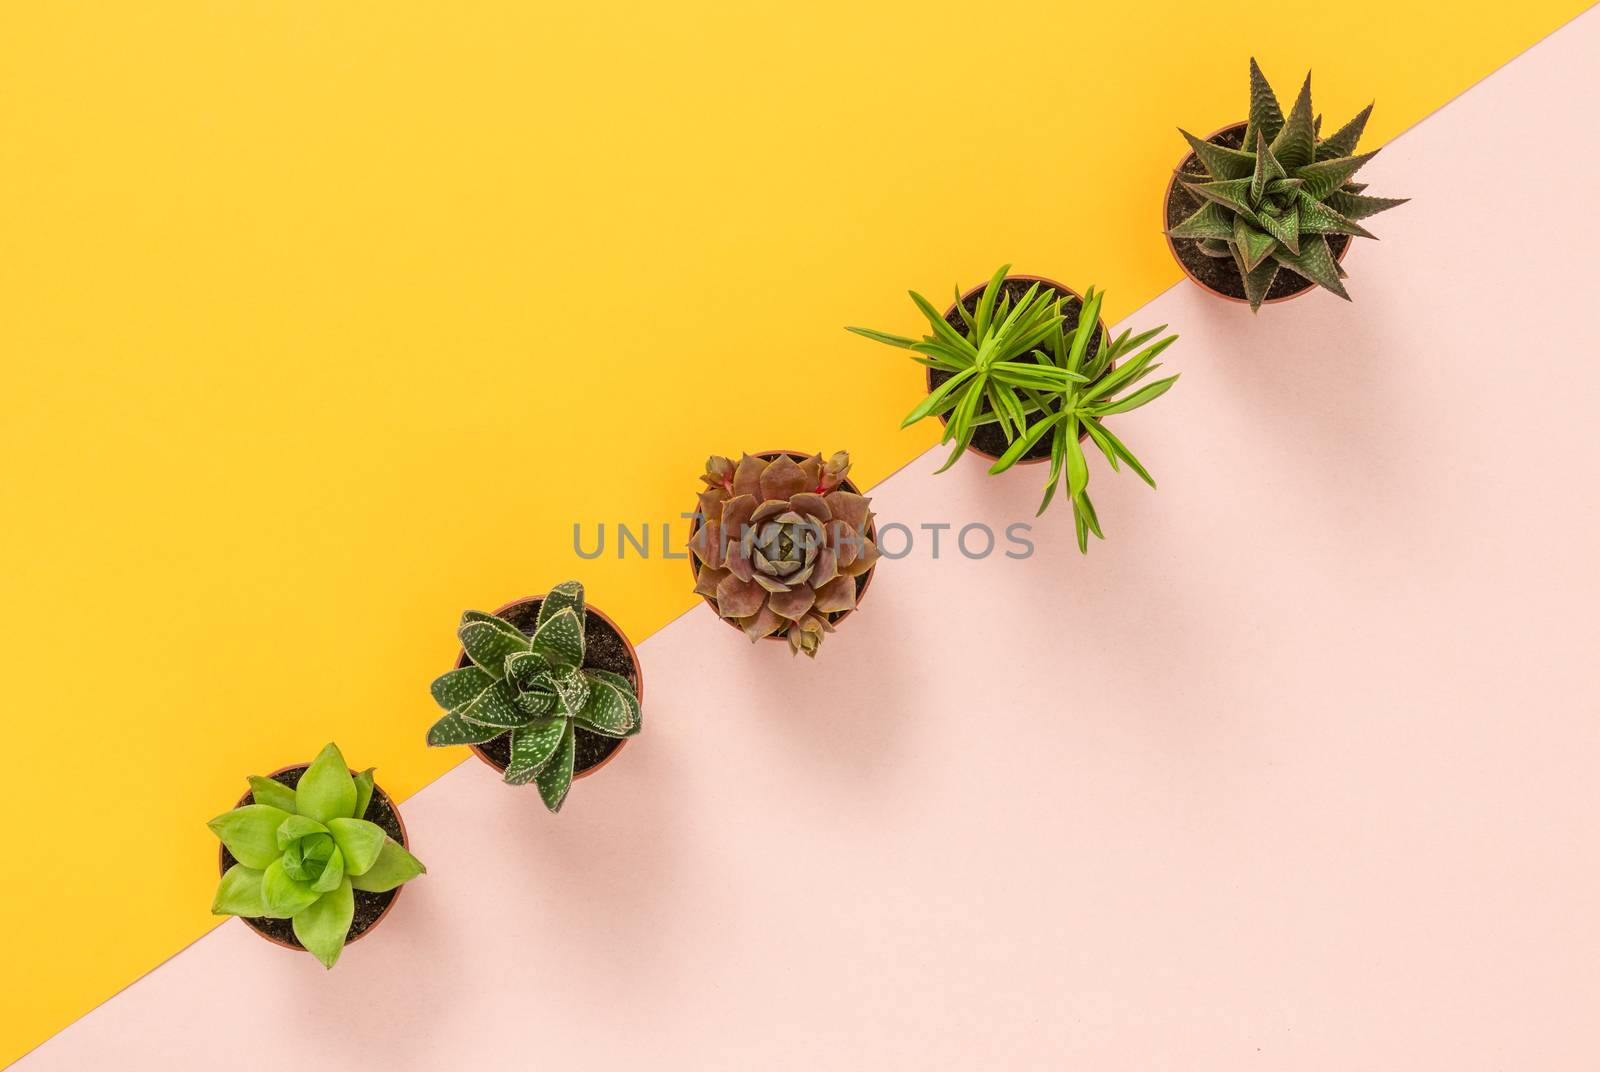 Succulent plants on yellow and pink background by anikasalsera